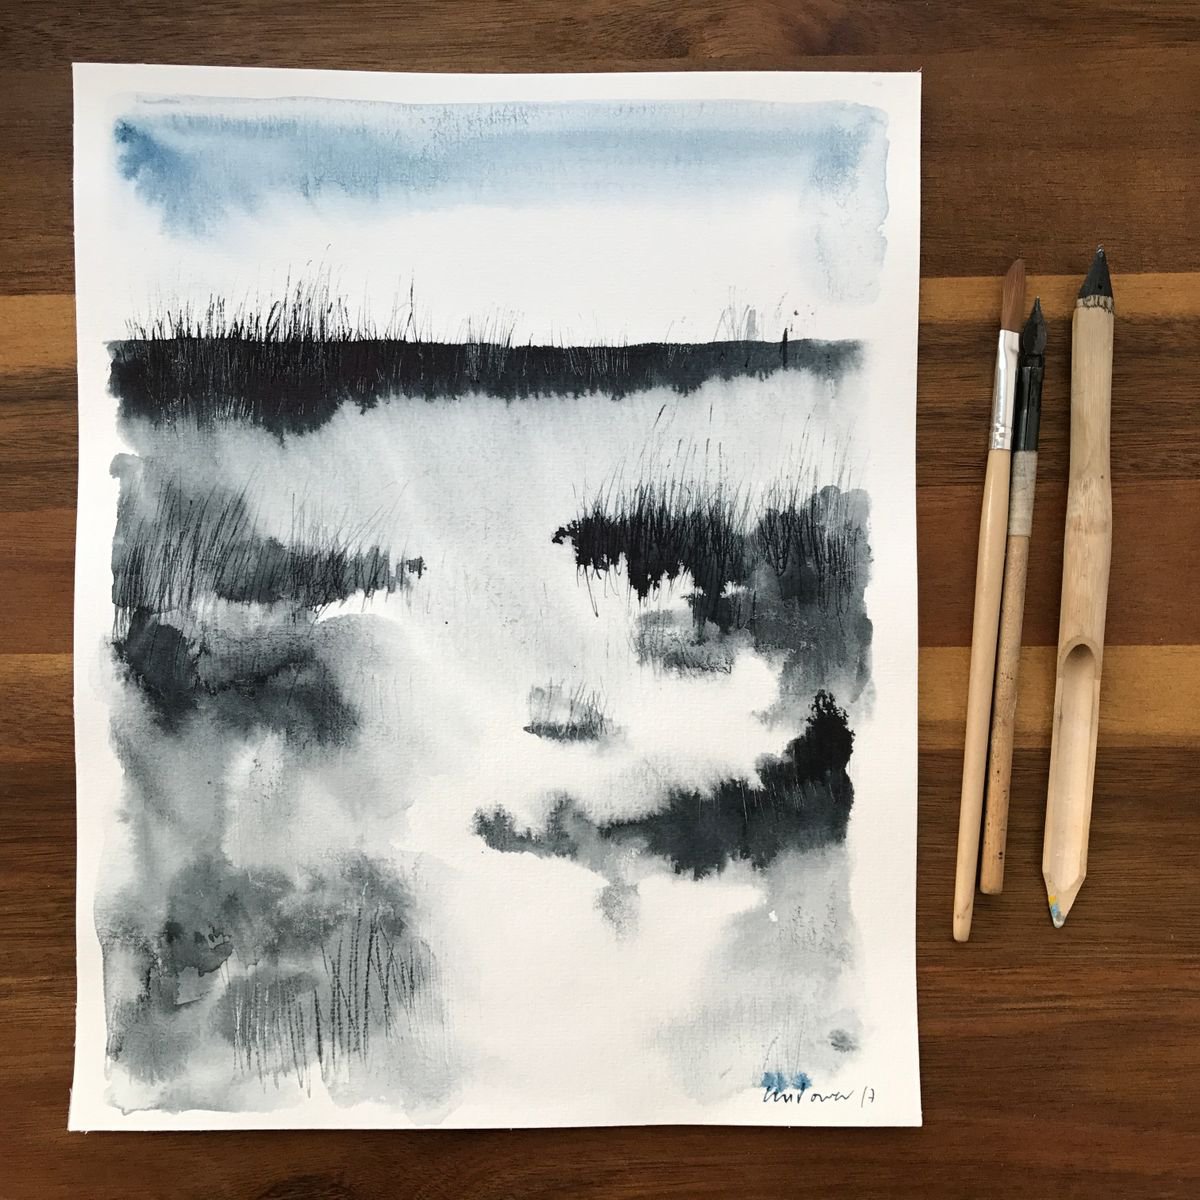 Low light - expressive landscape at Dusk, ink and watercolour by Luci Power